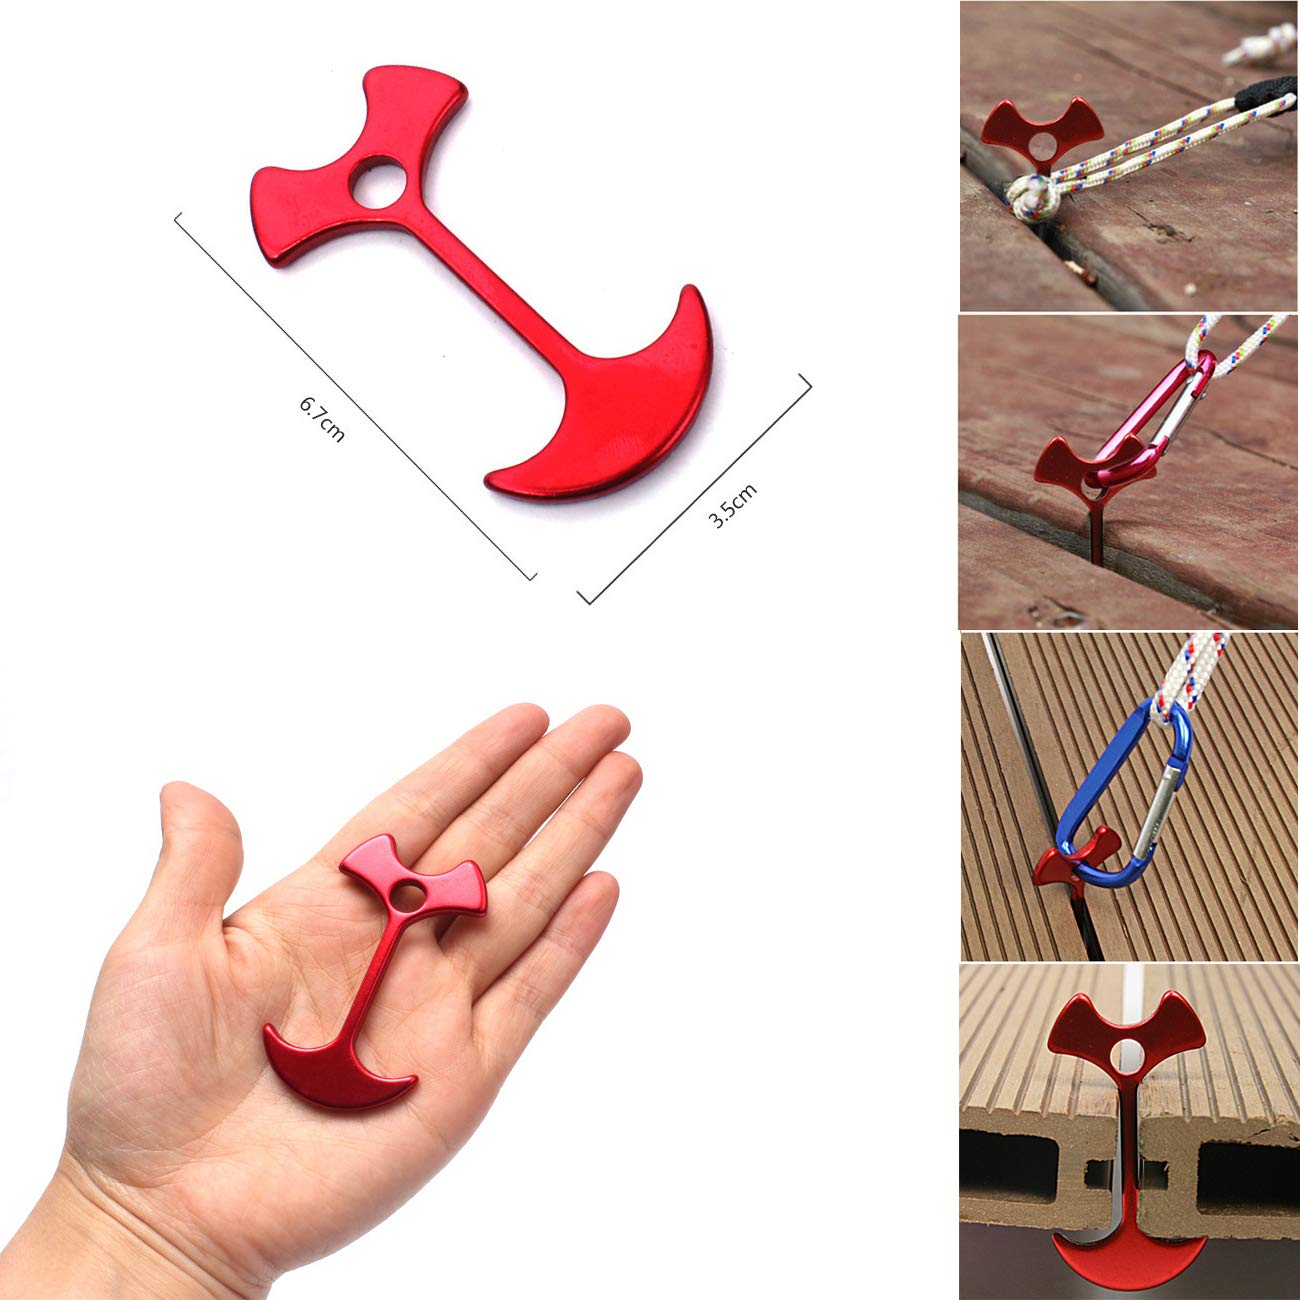 BSGB 43PCS Aluminum Alloy Fish Bone Anchor Deck Plank Board Tent Stakes D Carabiner Wind Rope Buckle 3 Hole Guyline Adjuster Tent Cord Rope Tensioner Alligator Camping Tent Awning Tarp (Red, Normal)